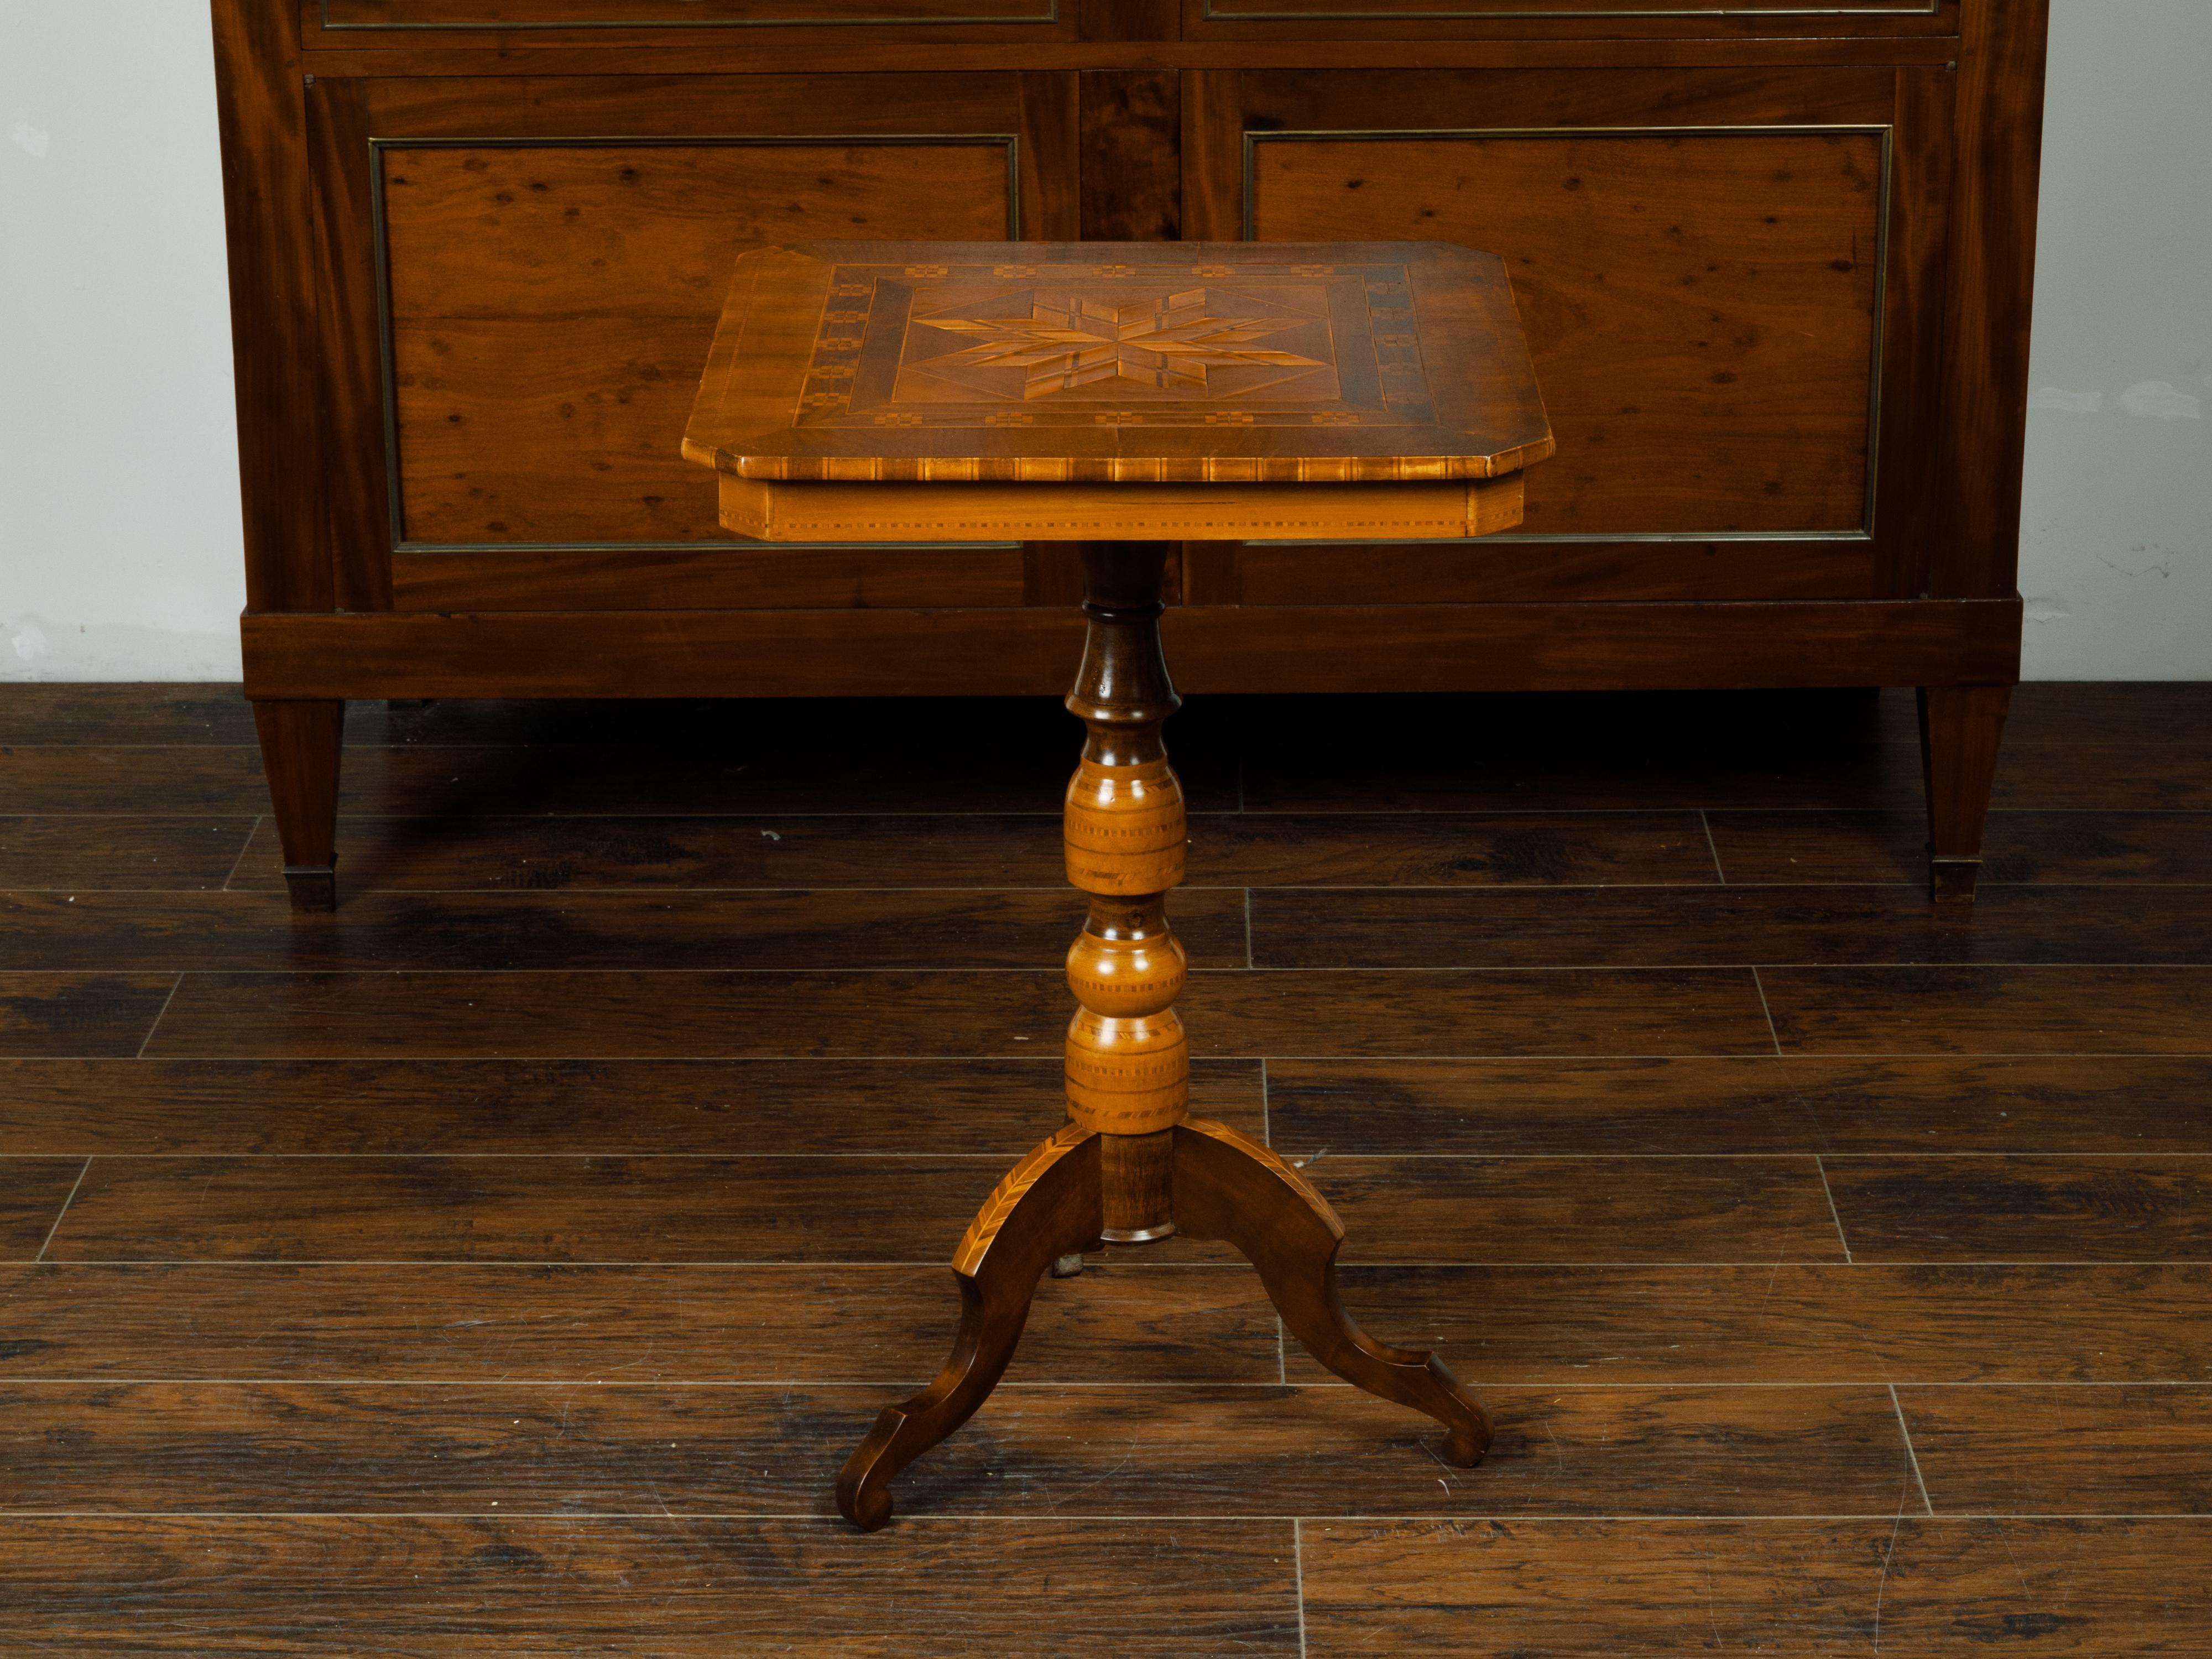 An Italian wooden guéridon from the late 19th century, with marquetry décor and tripod base. Created in Italy during the last quarter of the 19th century, this wooden guéridon attracts our attention with its lovely square top with canted corners,